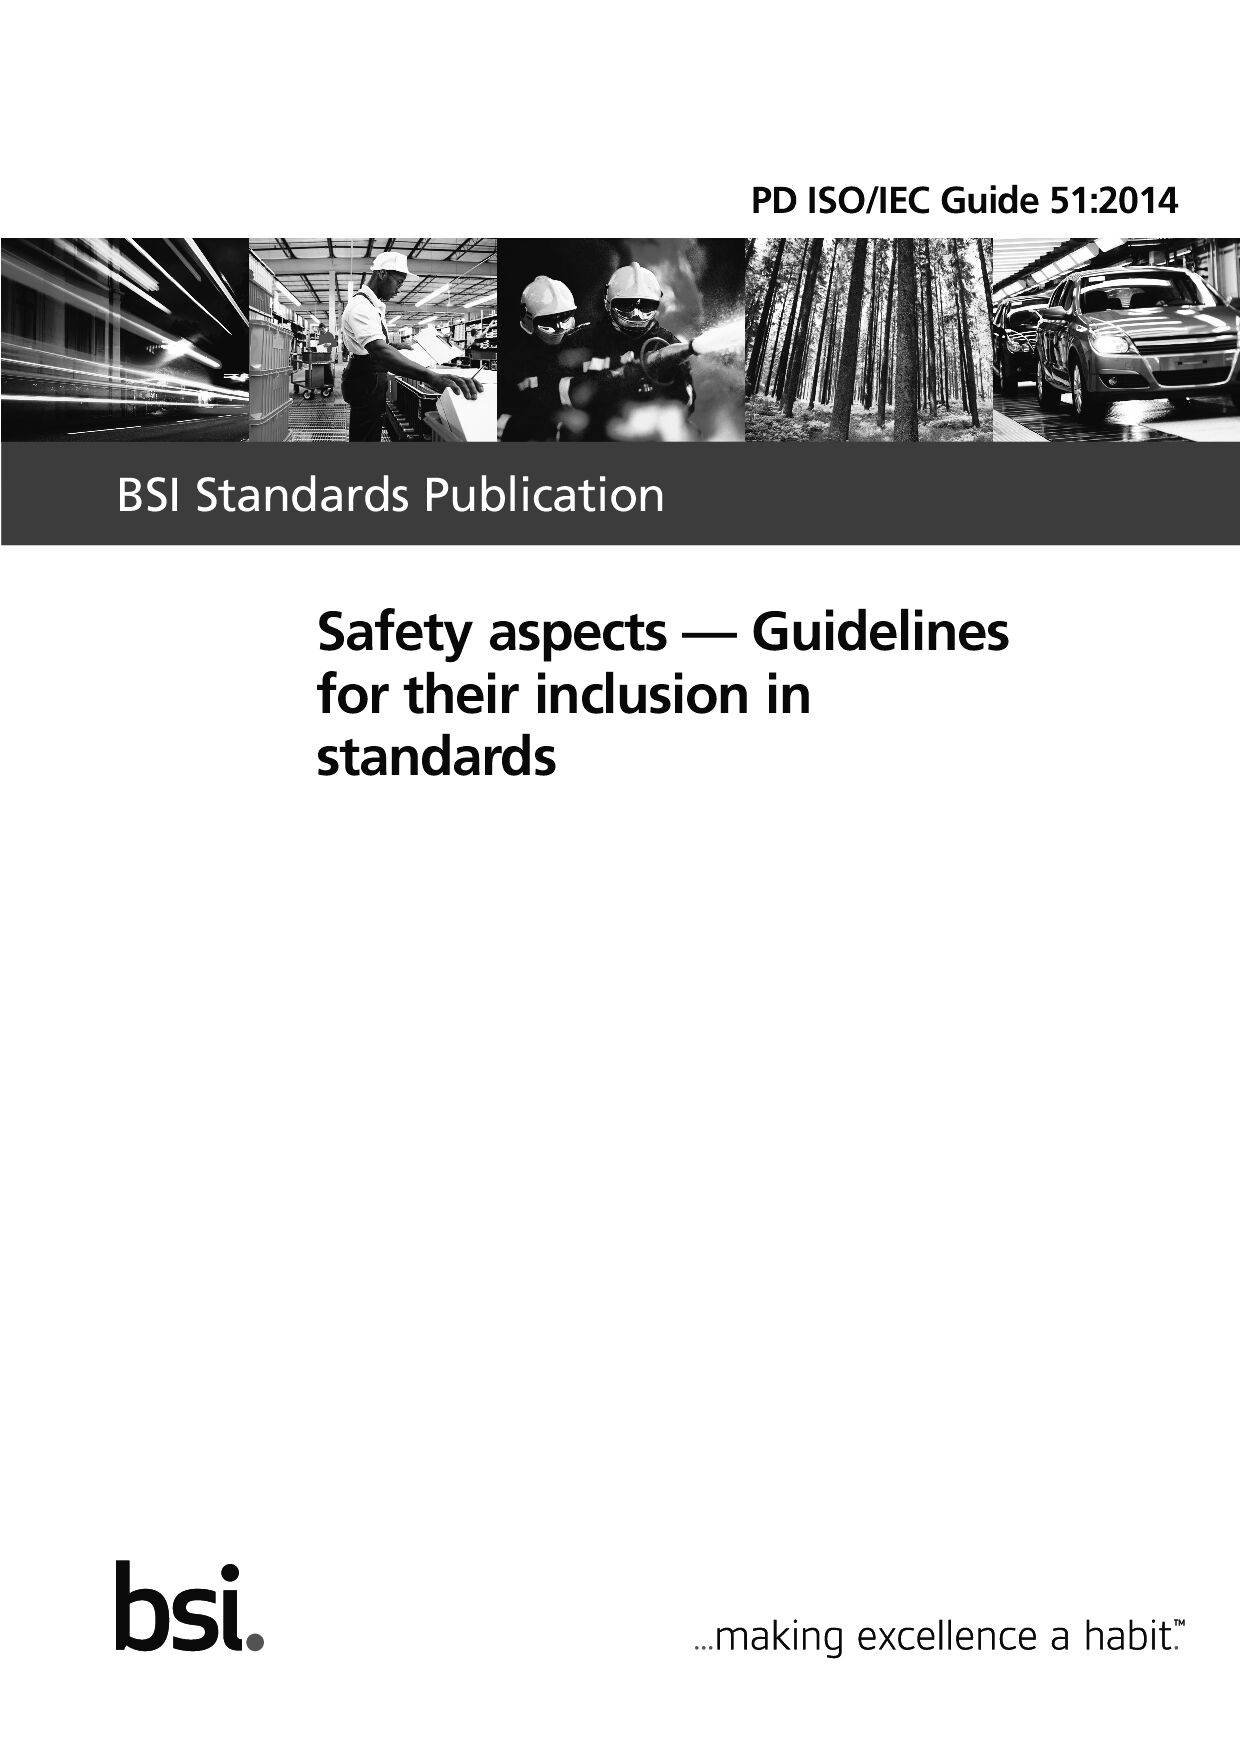 PD ISO/IEC GUIDE 51:2014封面图